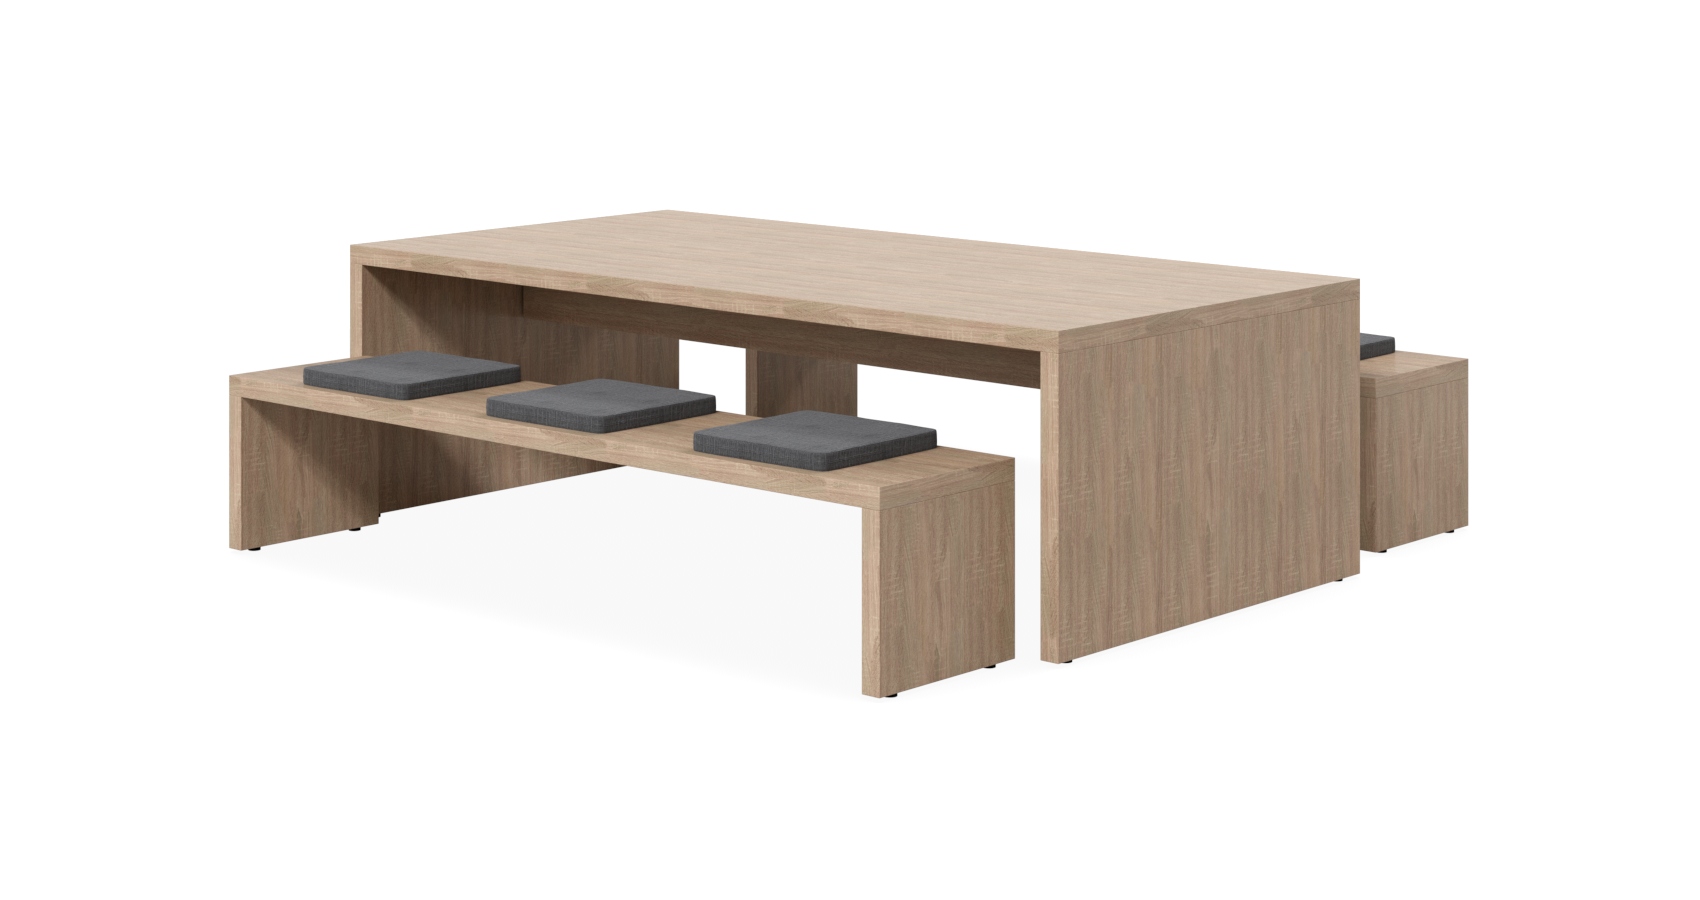 Buzz_Table_and_Bench_FV